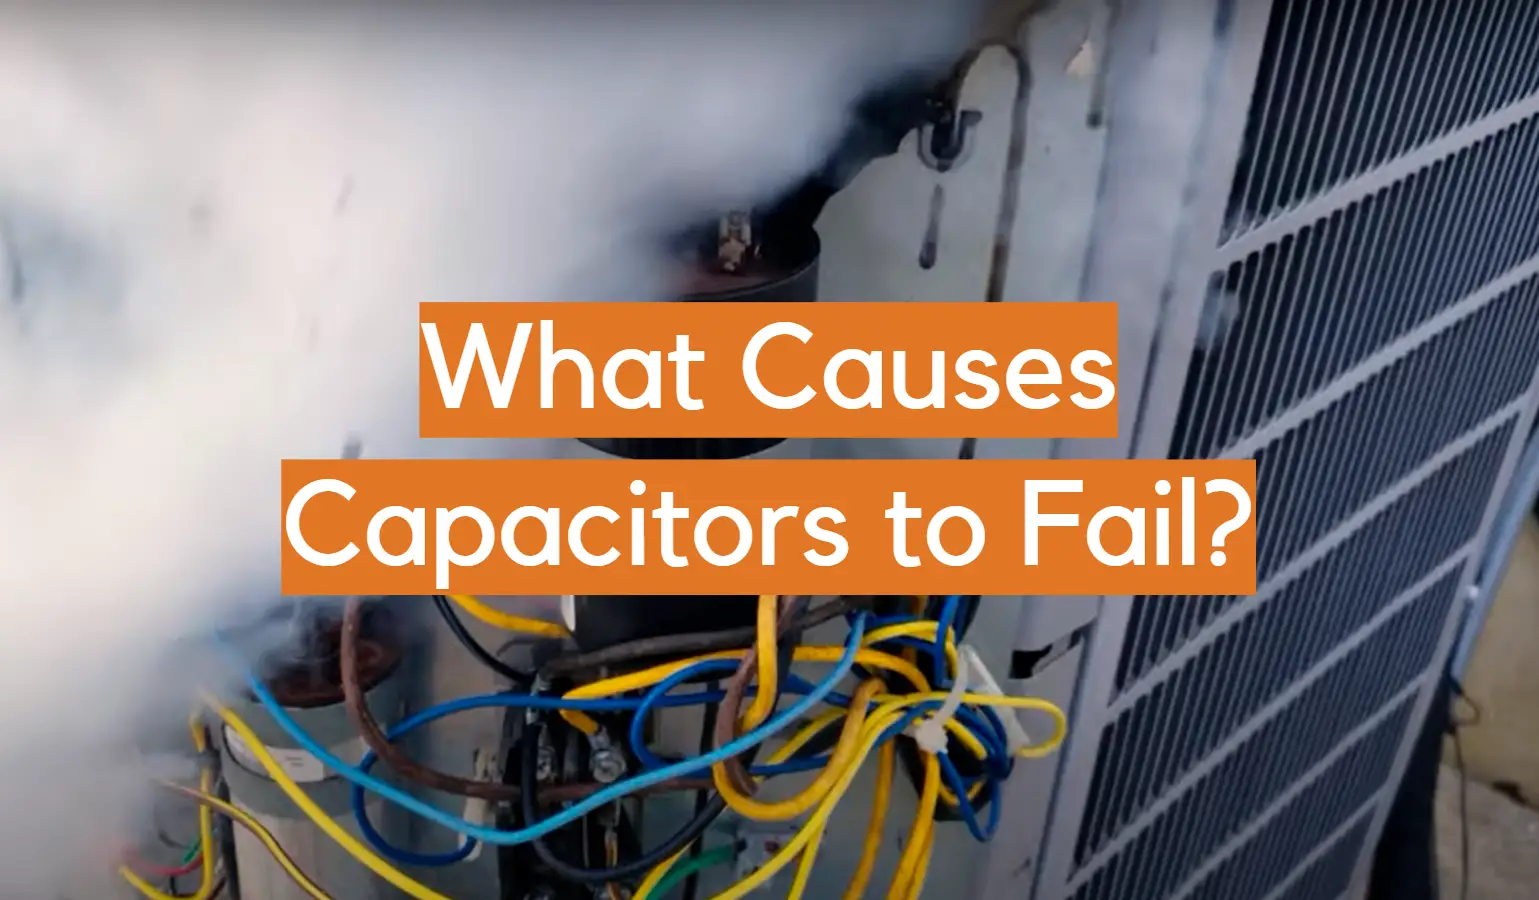 What Causes Capacitors to Fail?